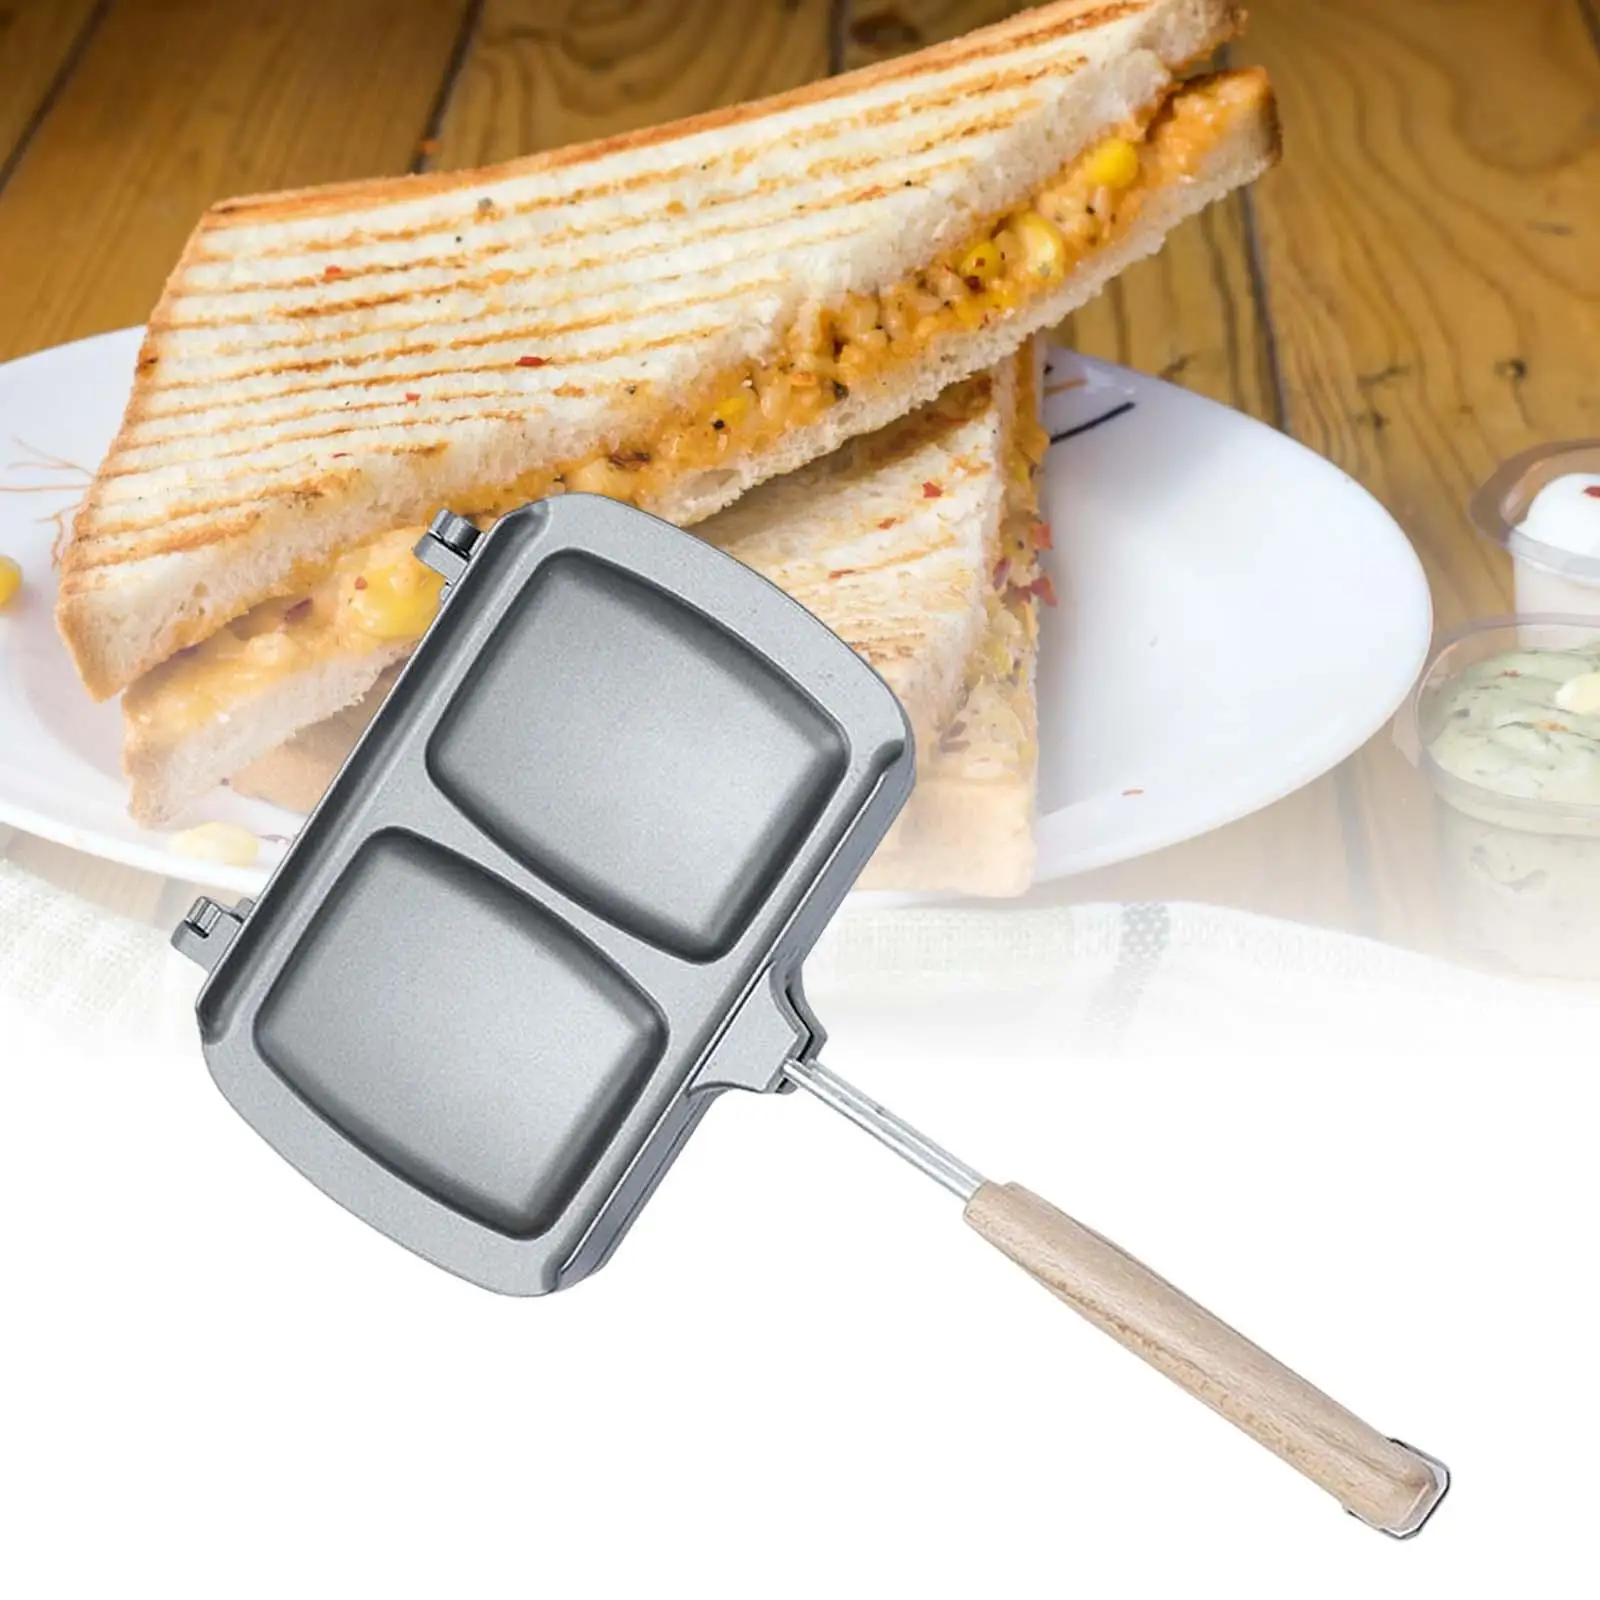 Bread Toast Maker Non Stick Grill Pan Double Sided Heating Frying Egg Ham Sandwiches Maker for Induction Cooker Stove Top the product can be customized frying pan nonstick pan household frying pan induction cooker gas stove universal